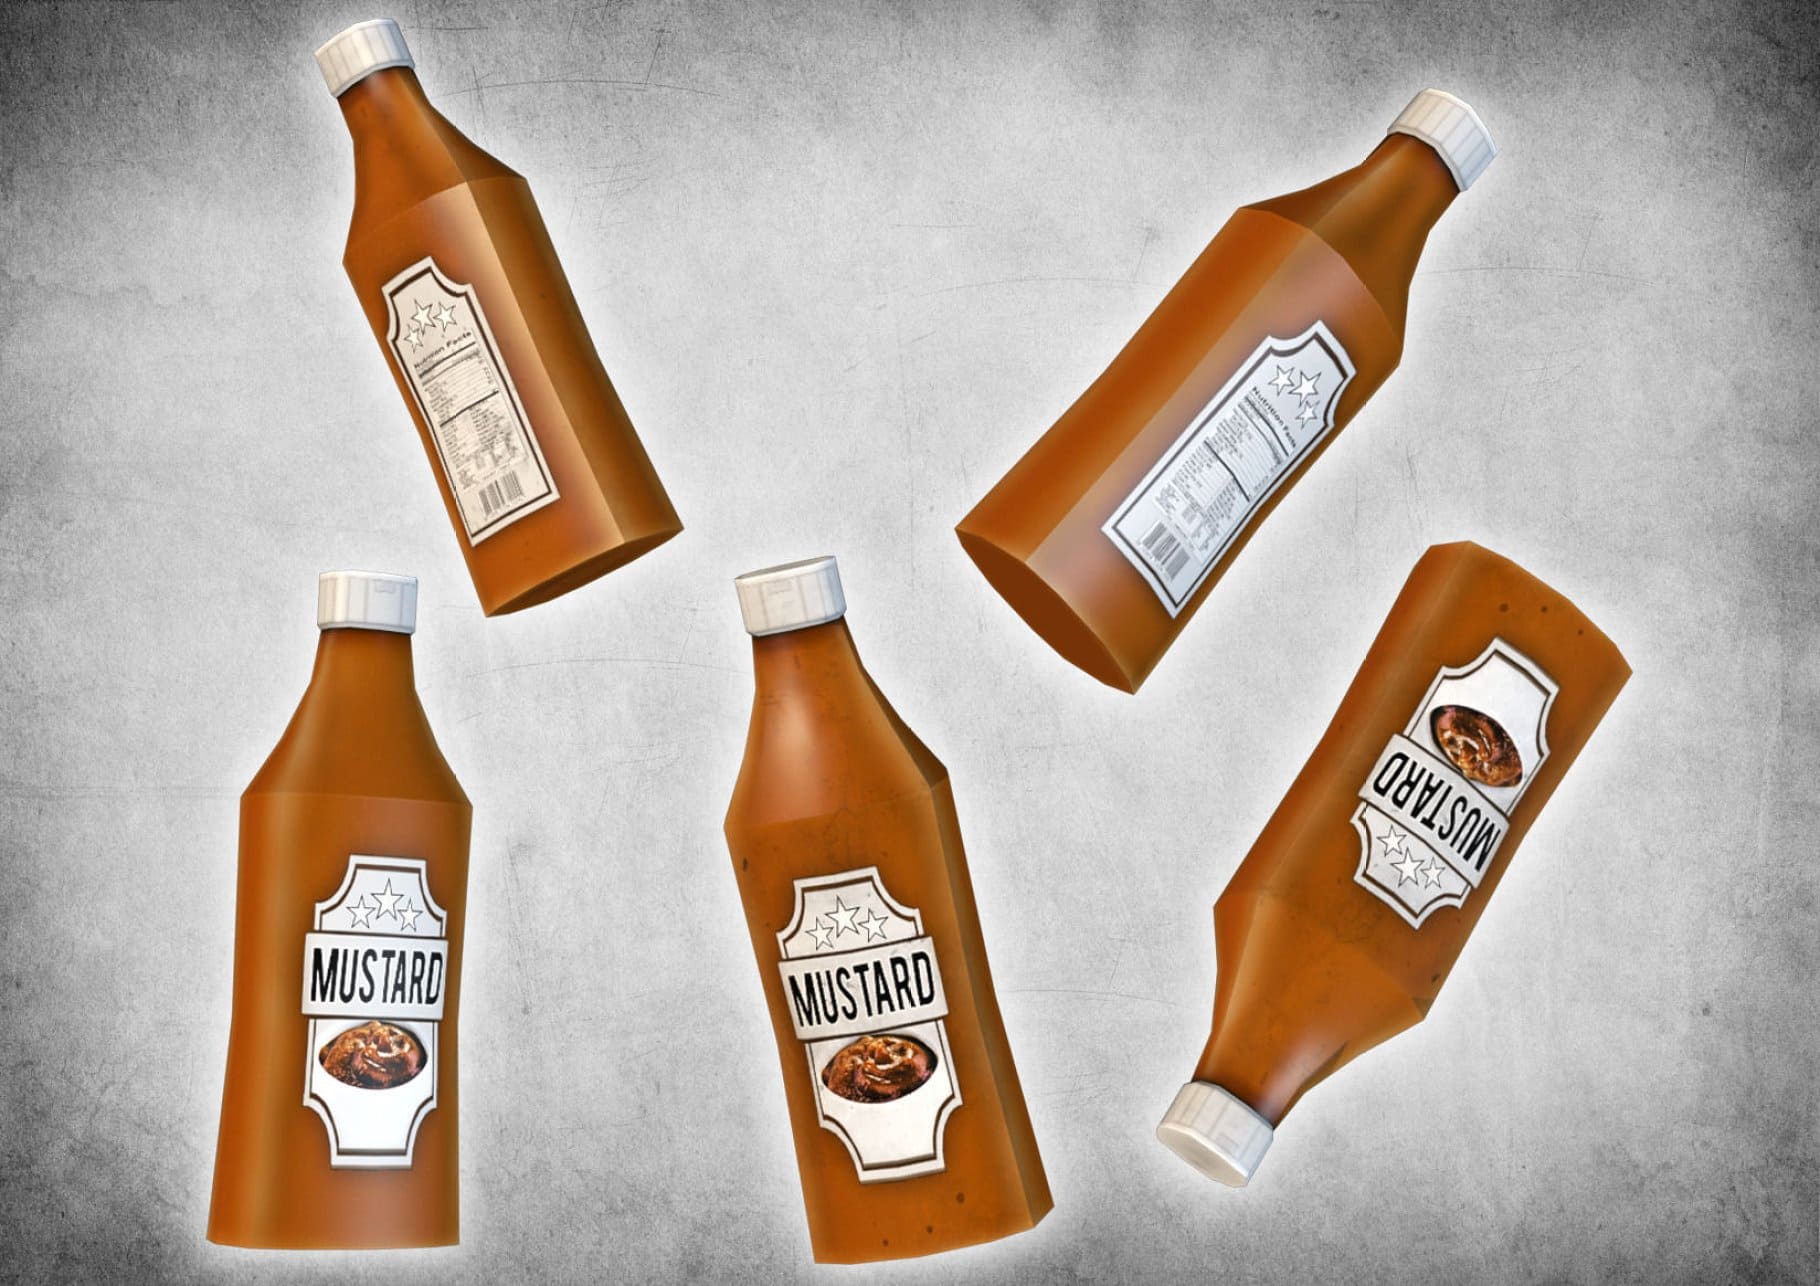 Cans of mustard in different positions on a gray background.